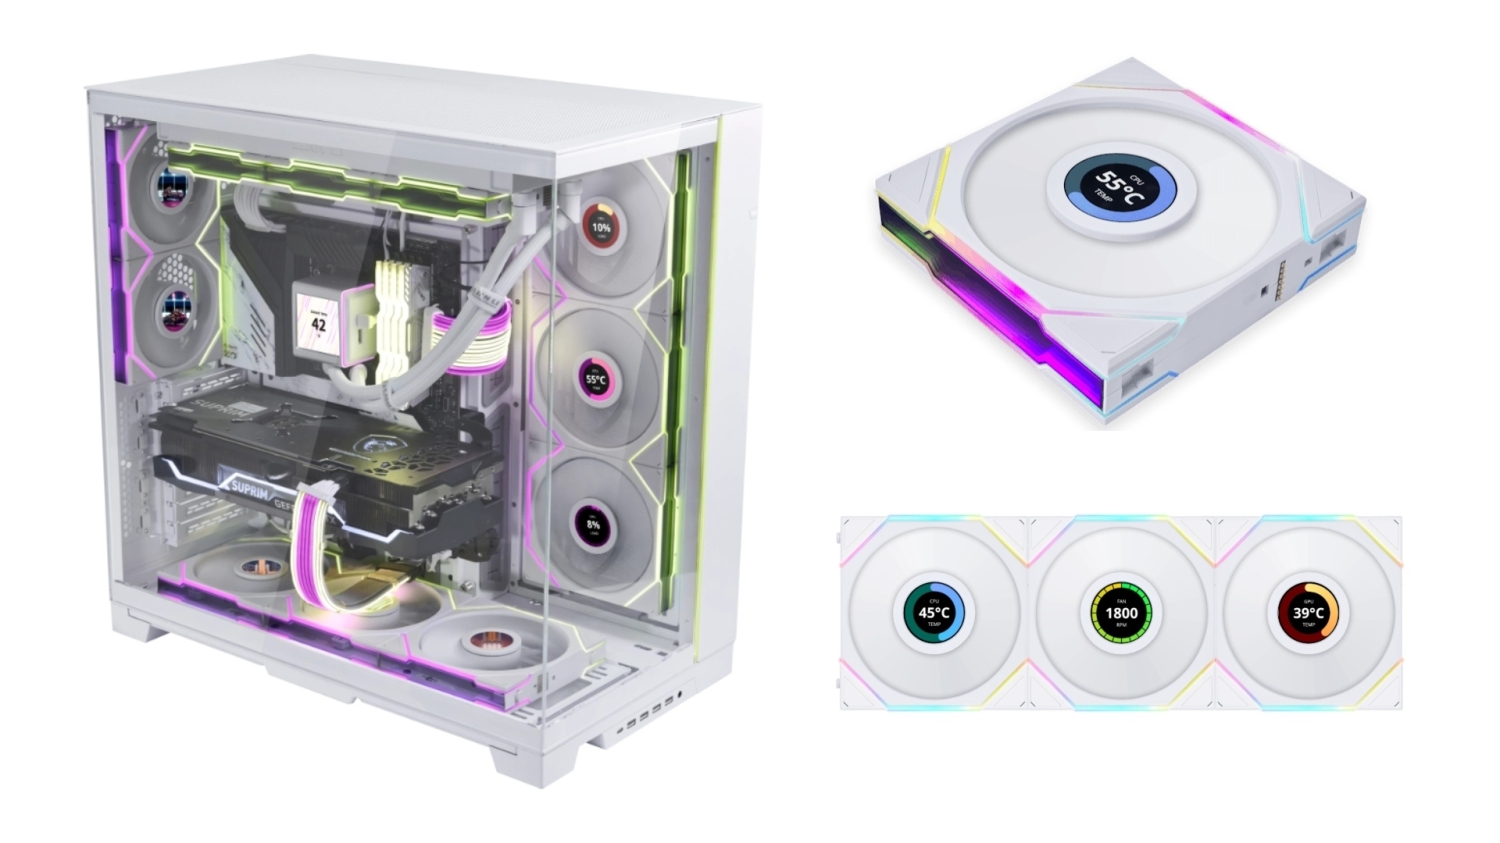 Lian Li's New Case Fans Have a Built-In LCD, RGB, and Infinity Mirrors